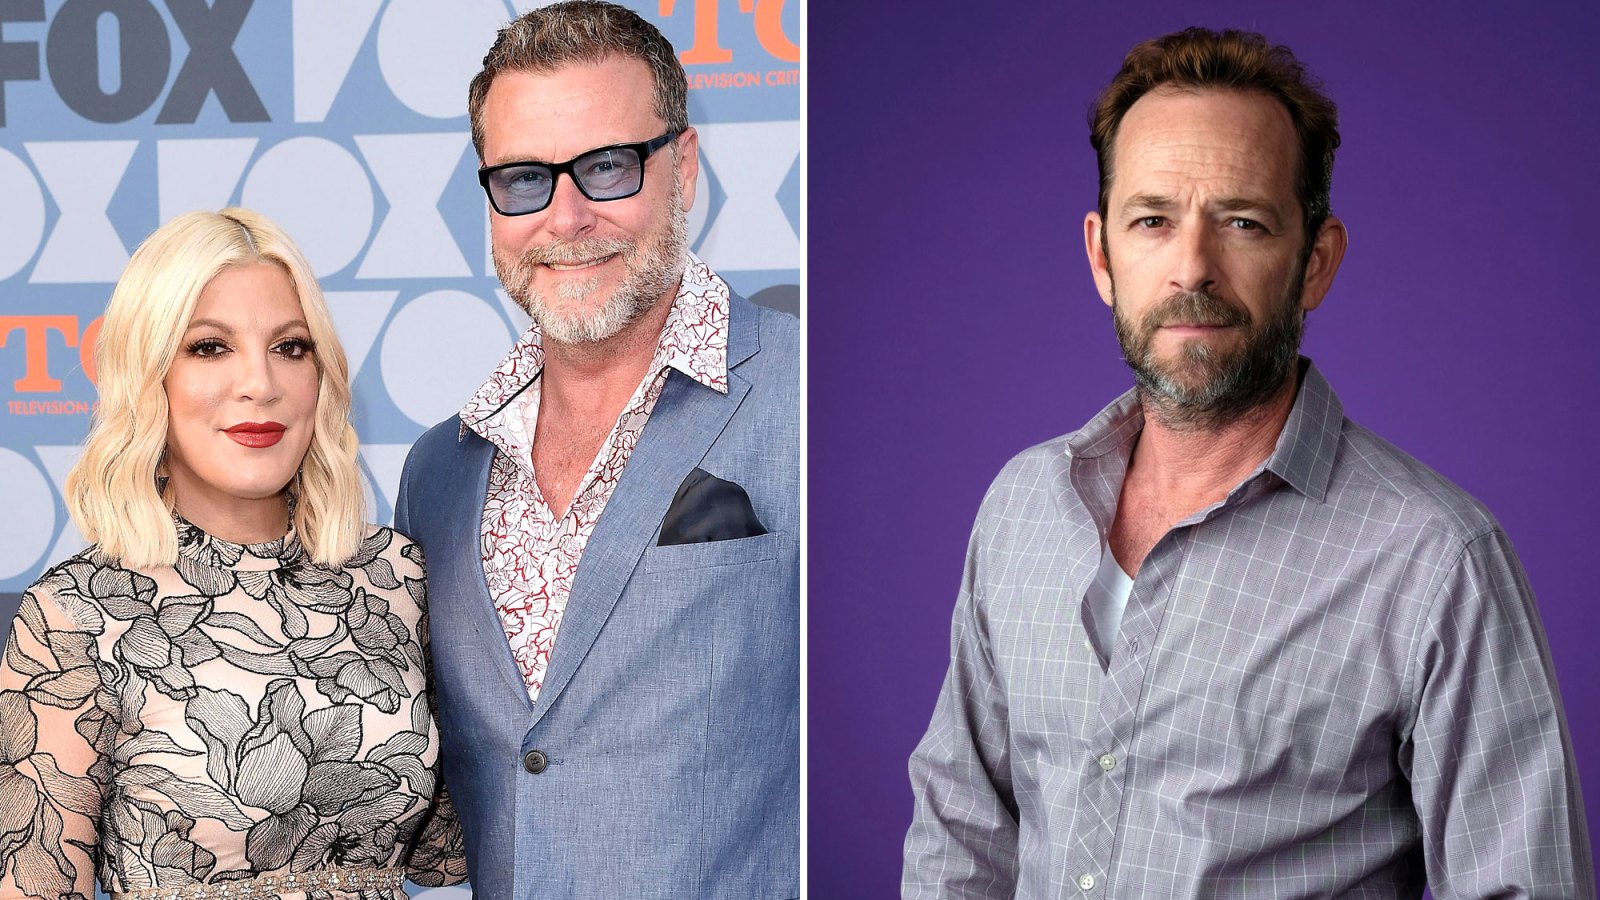 Tori Spelling and Dean McDermott Slam the Oscars for Leaving Luke Perry and Aaron Spelling Out of In Memoriam Tributes